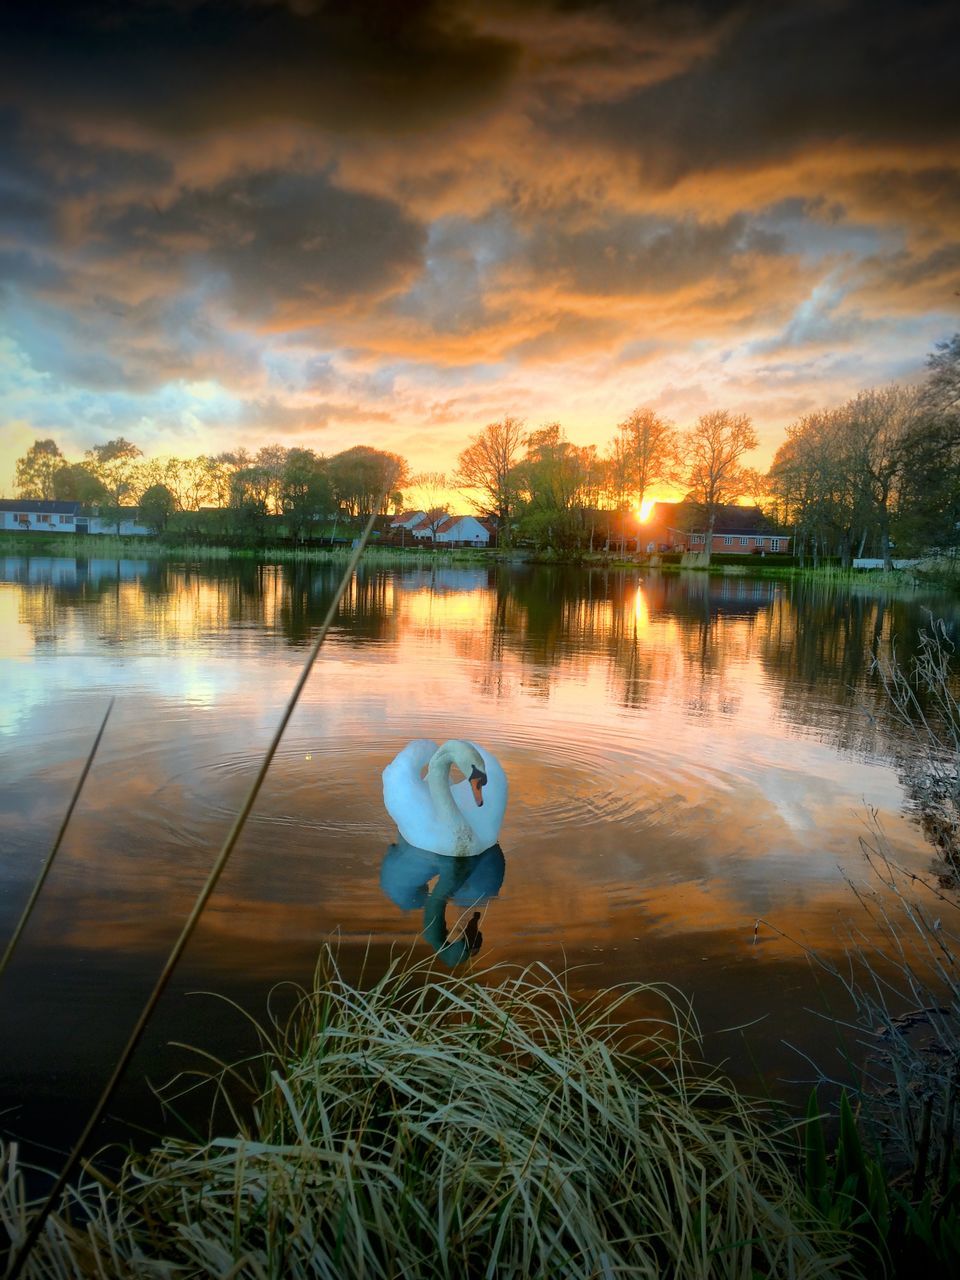 sky, water, lake, reflection, cloud - sky, grass, bird, animal themes, nature, cloud, cloudy, sunset, tranquility, swan, beauty in nature, tranquil scene, one animal, outdoors, childhood, standing